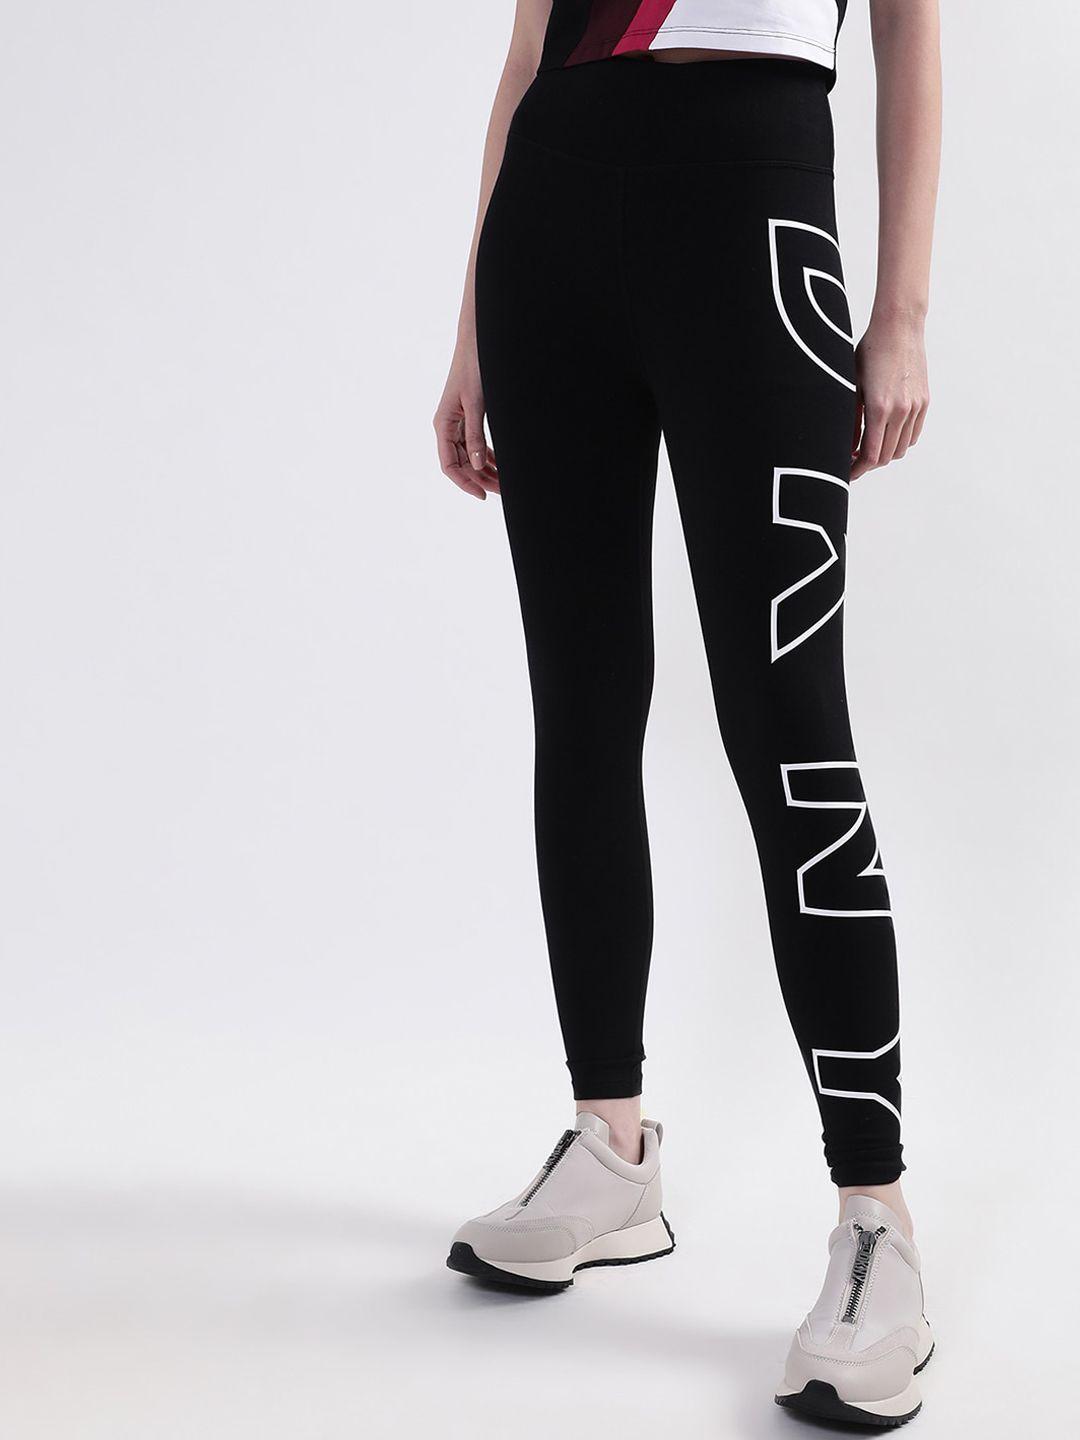 dkny women typography printed cotton sports tights